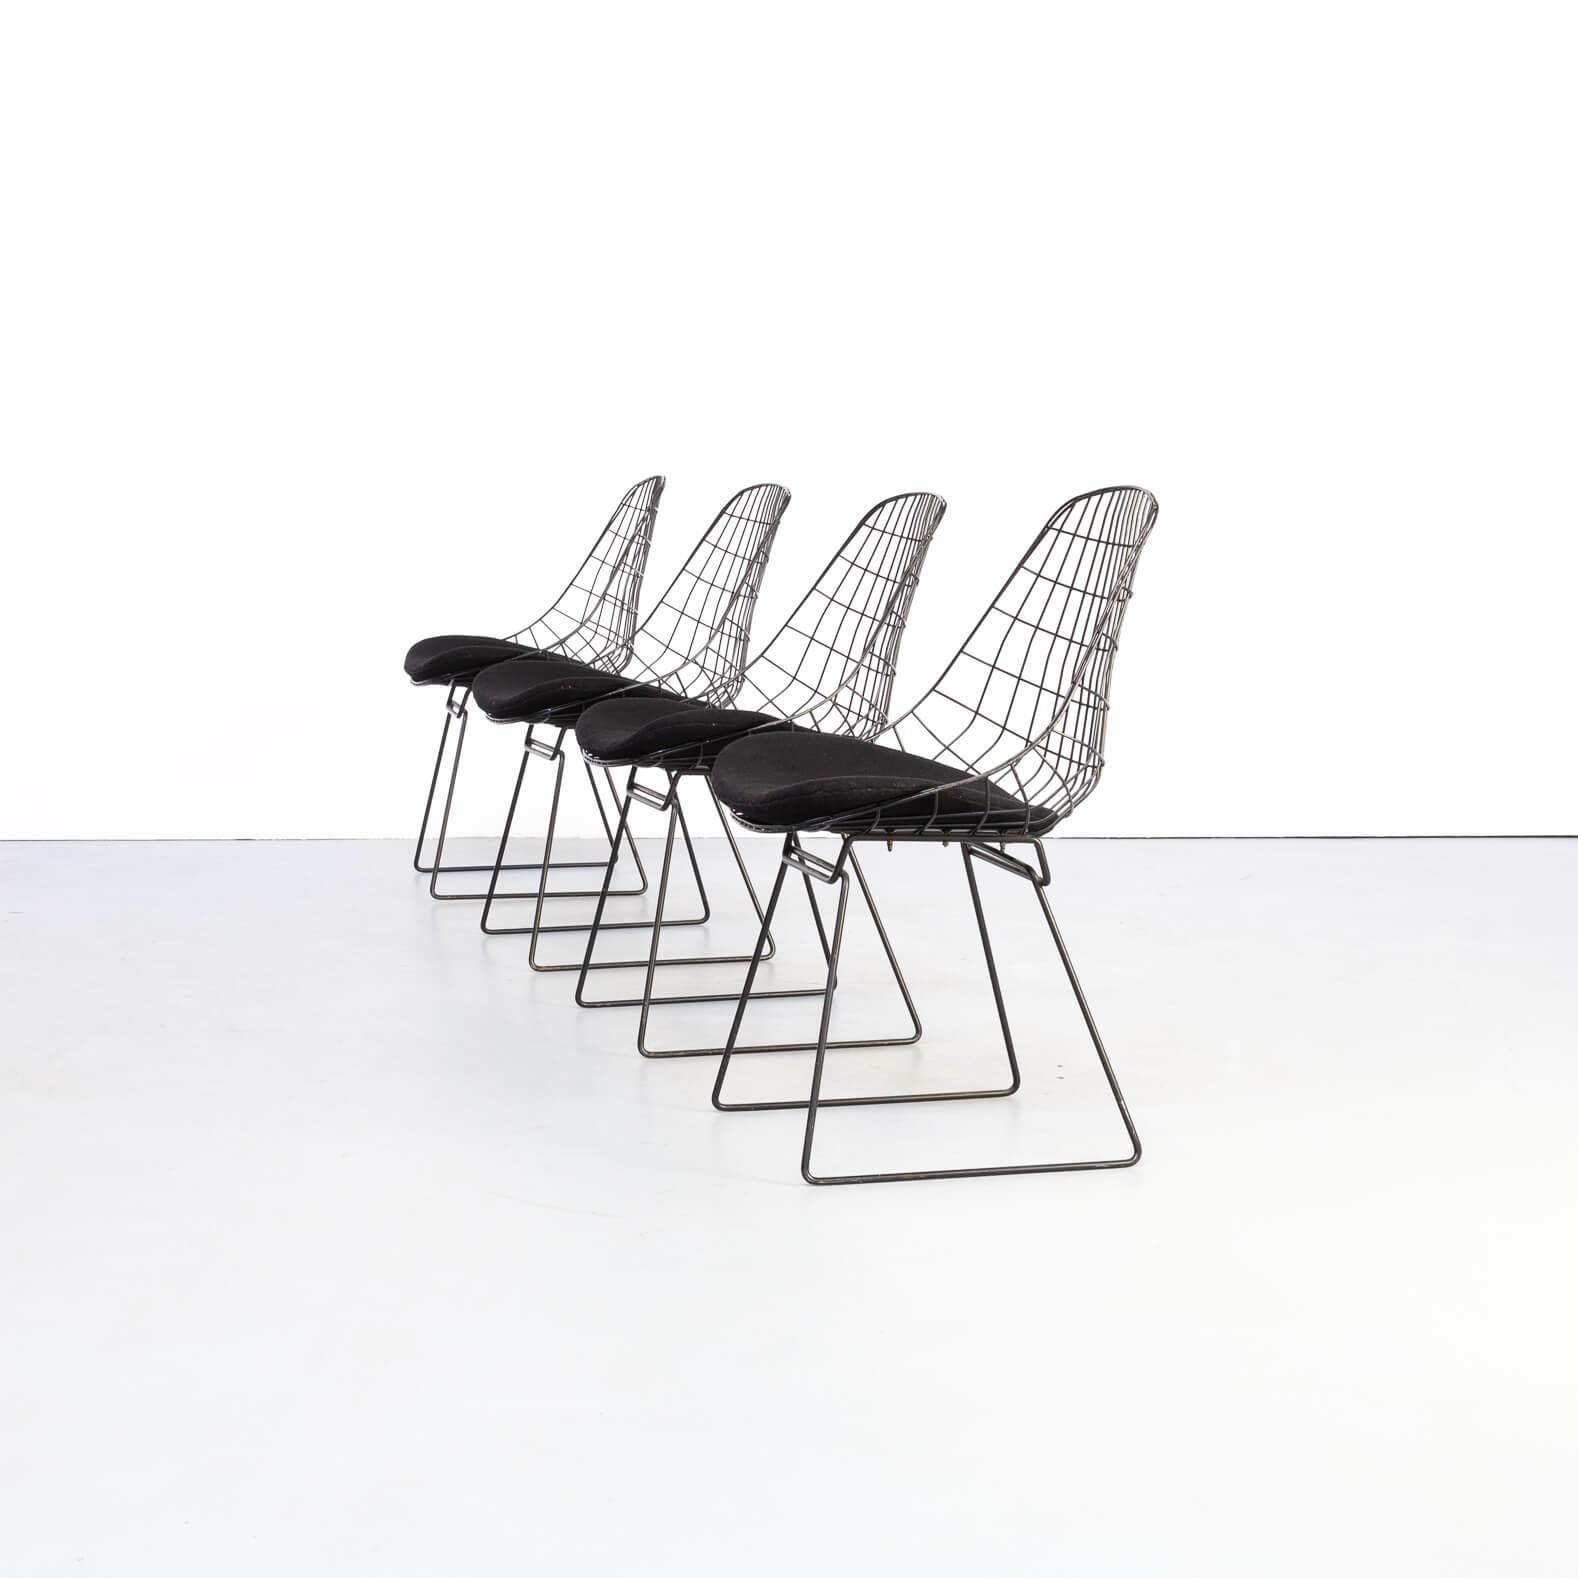 The Wire collection was designed in 1953 by Cees Braakman and Adriaan Dekker and has since grown into a design Classic, still available to the market today. The steel wire and the Minimalist appearance are characteristic of the Braakman wire chairs.